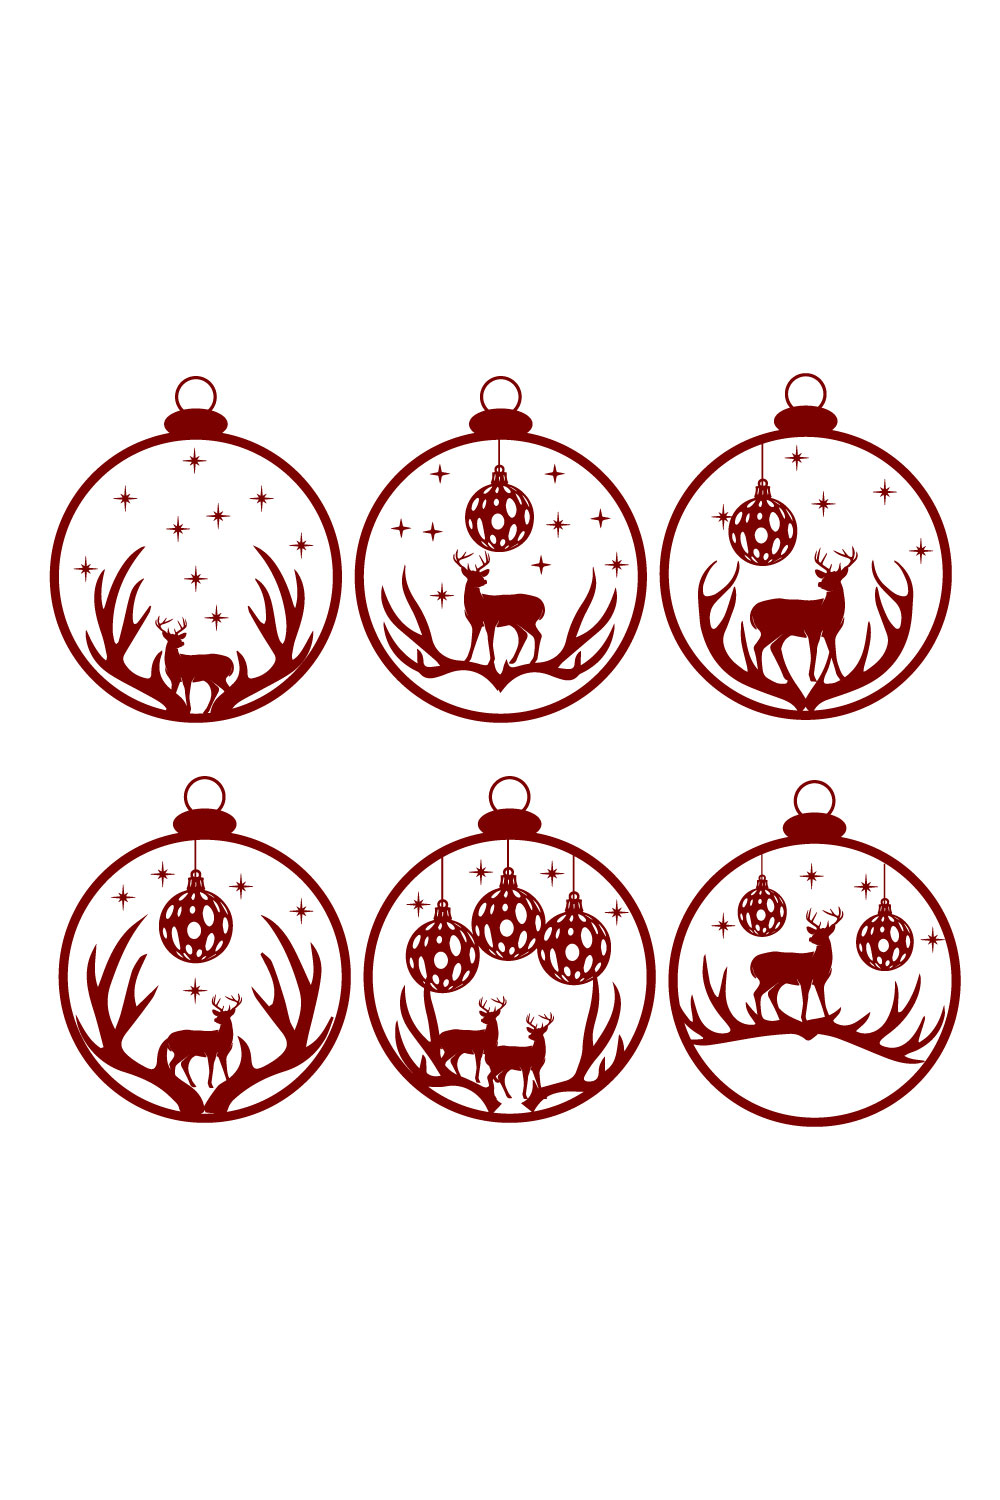 Collection of irresistible images of Christmas ornaments with the image of deer